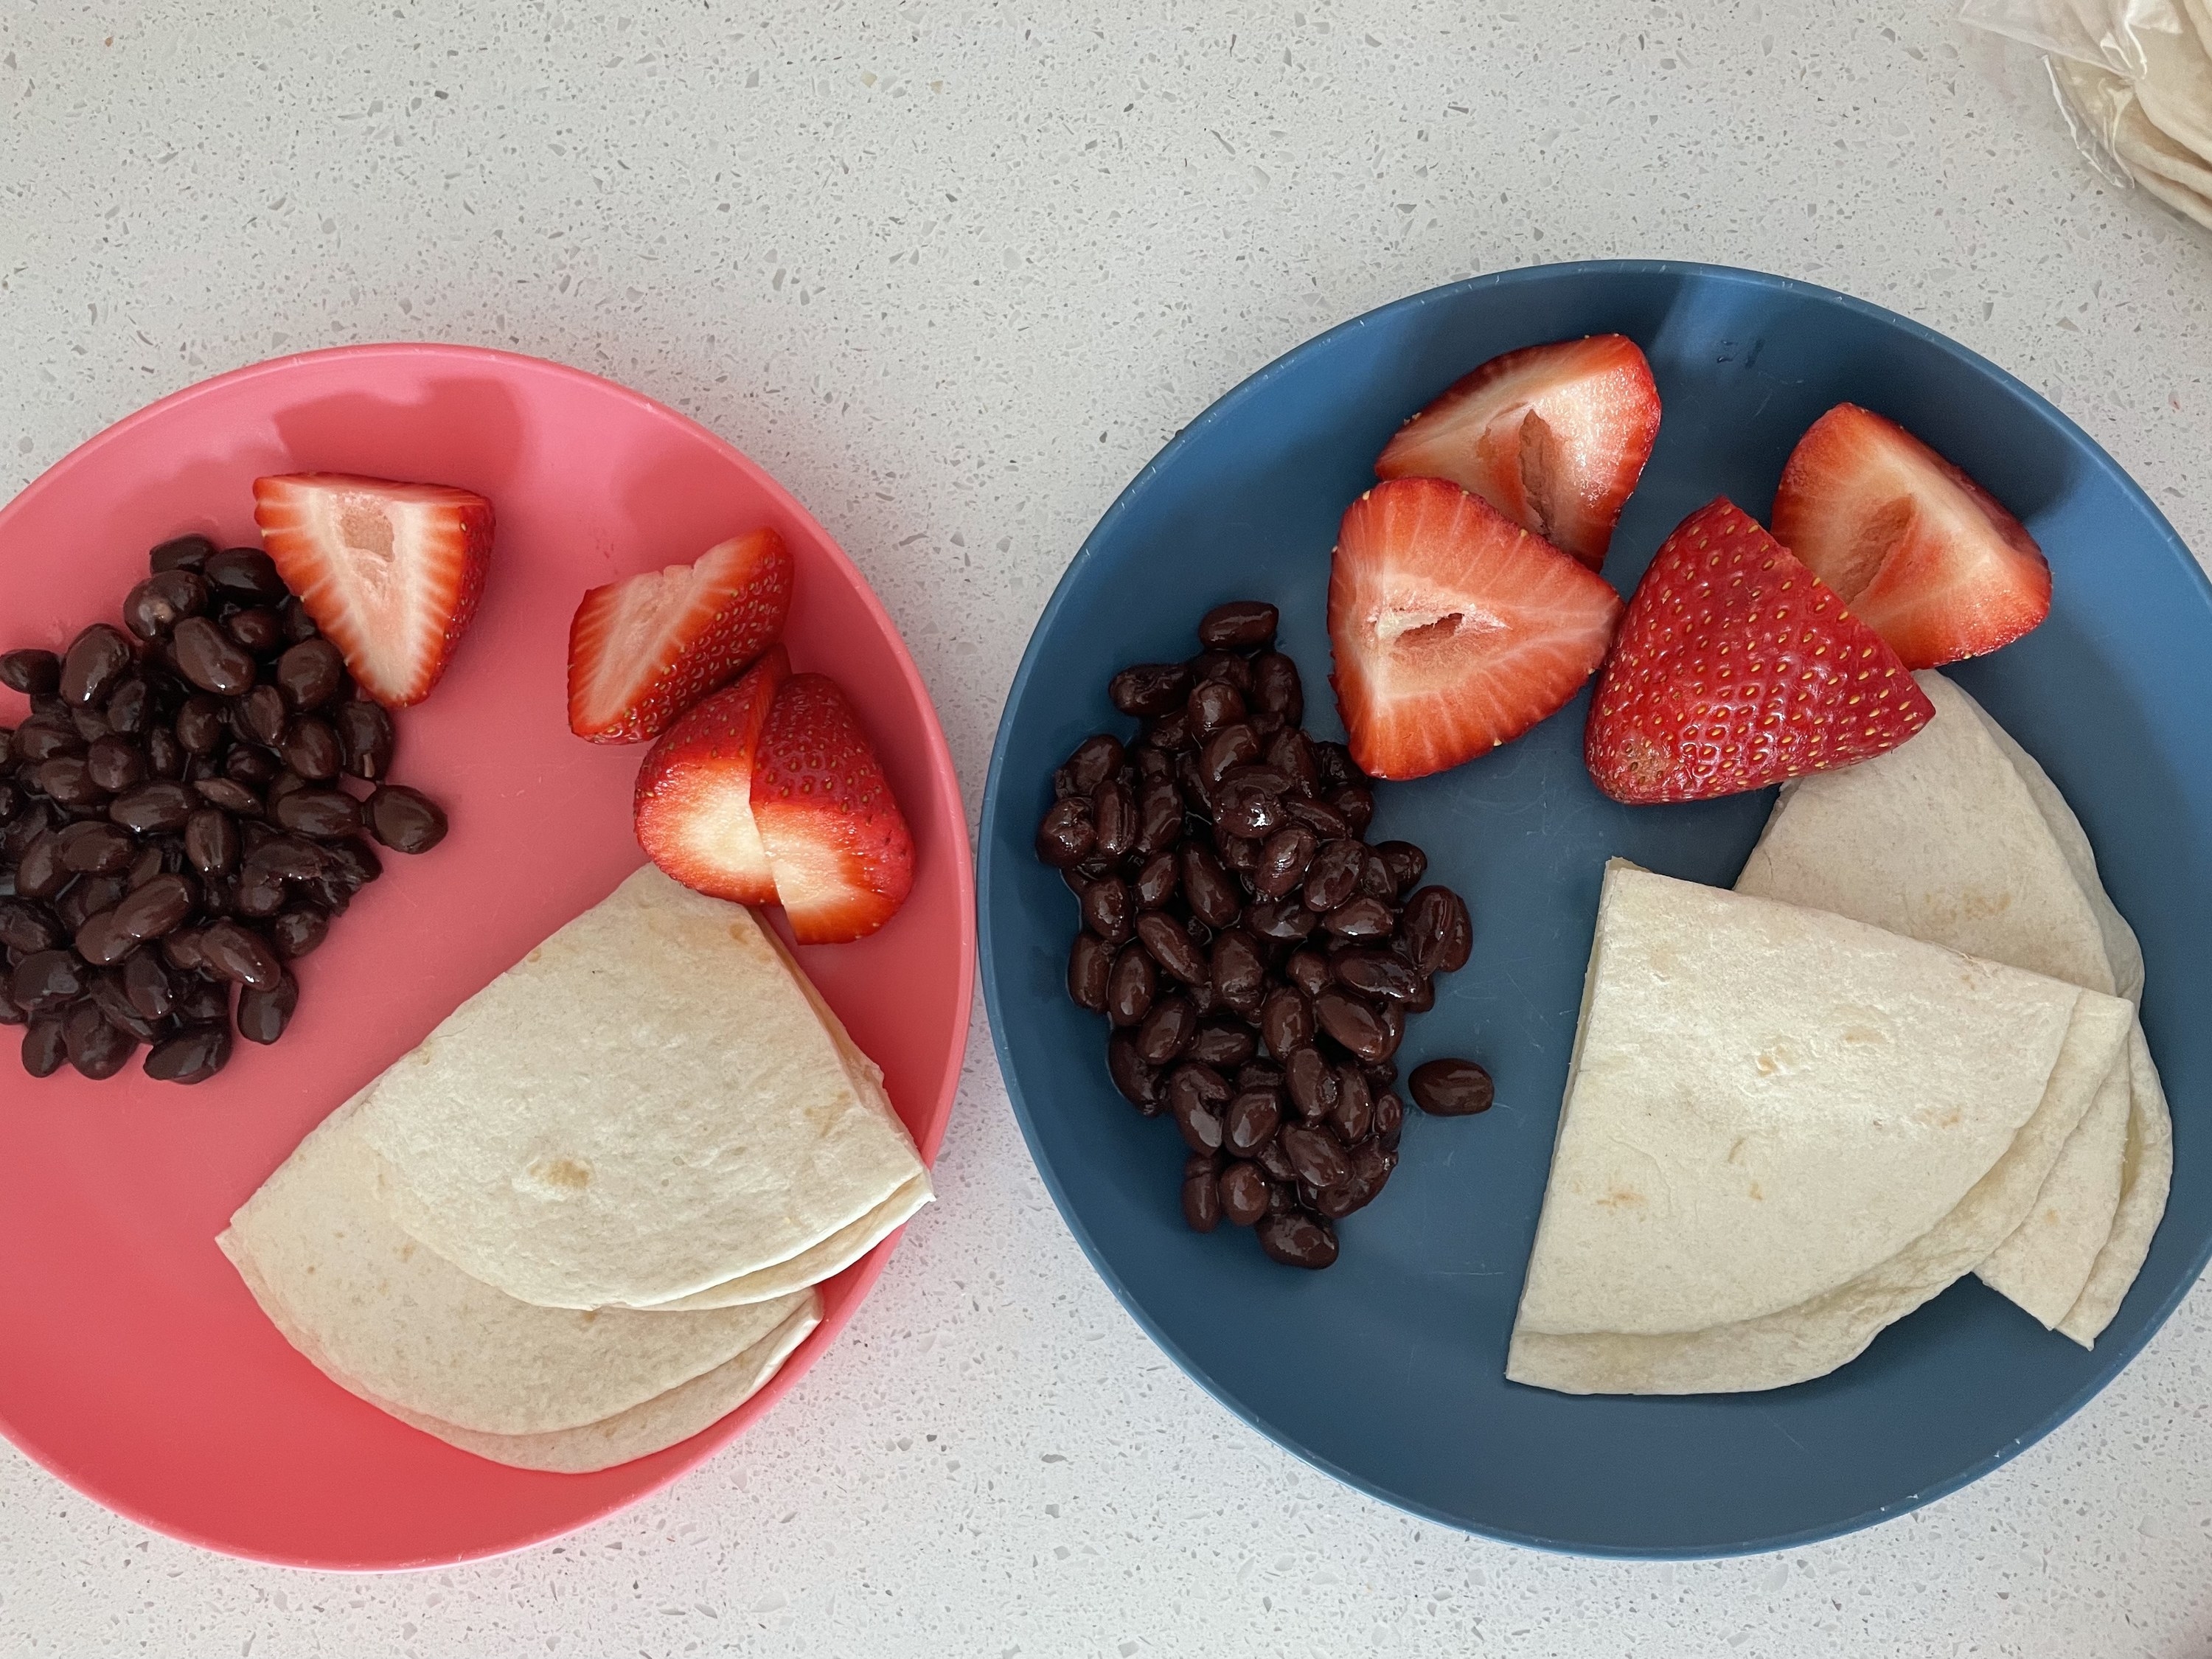 plates with quesadillas, strawberries, and black beans